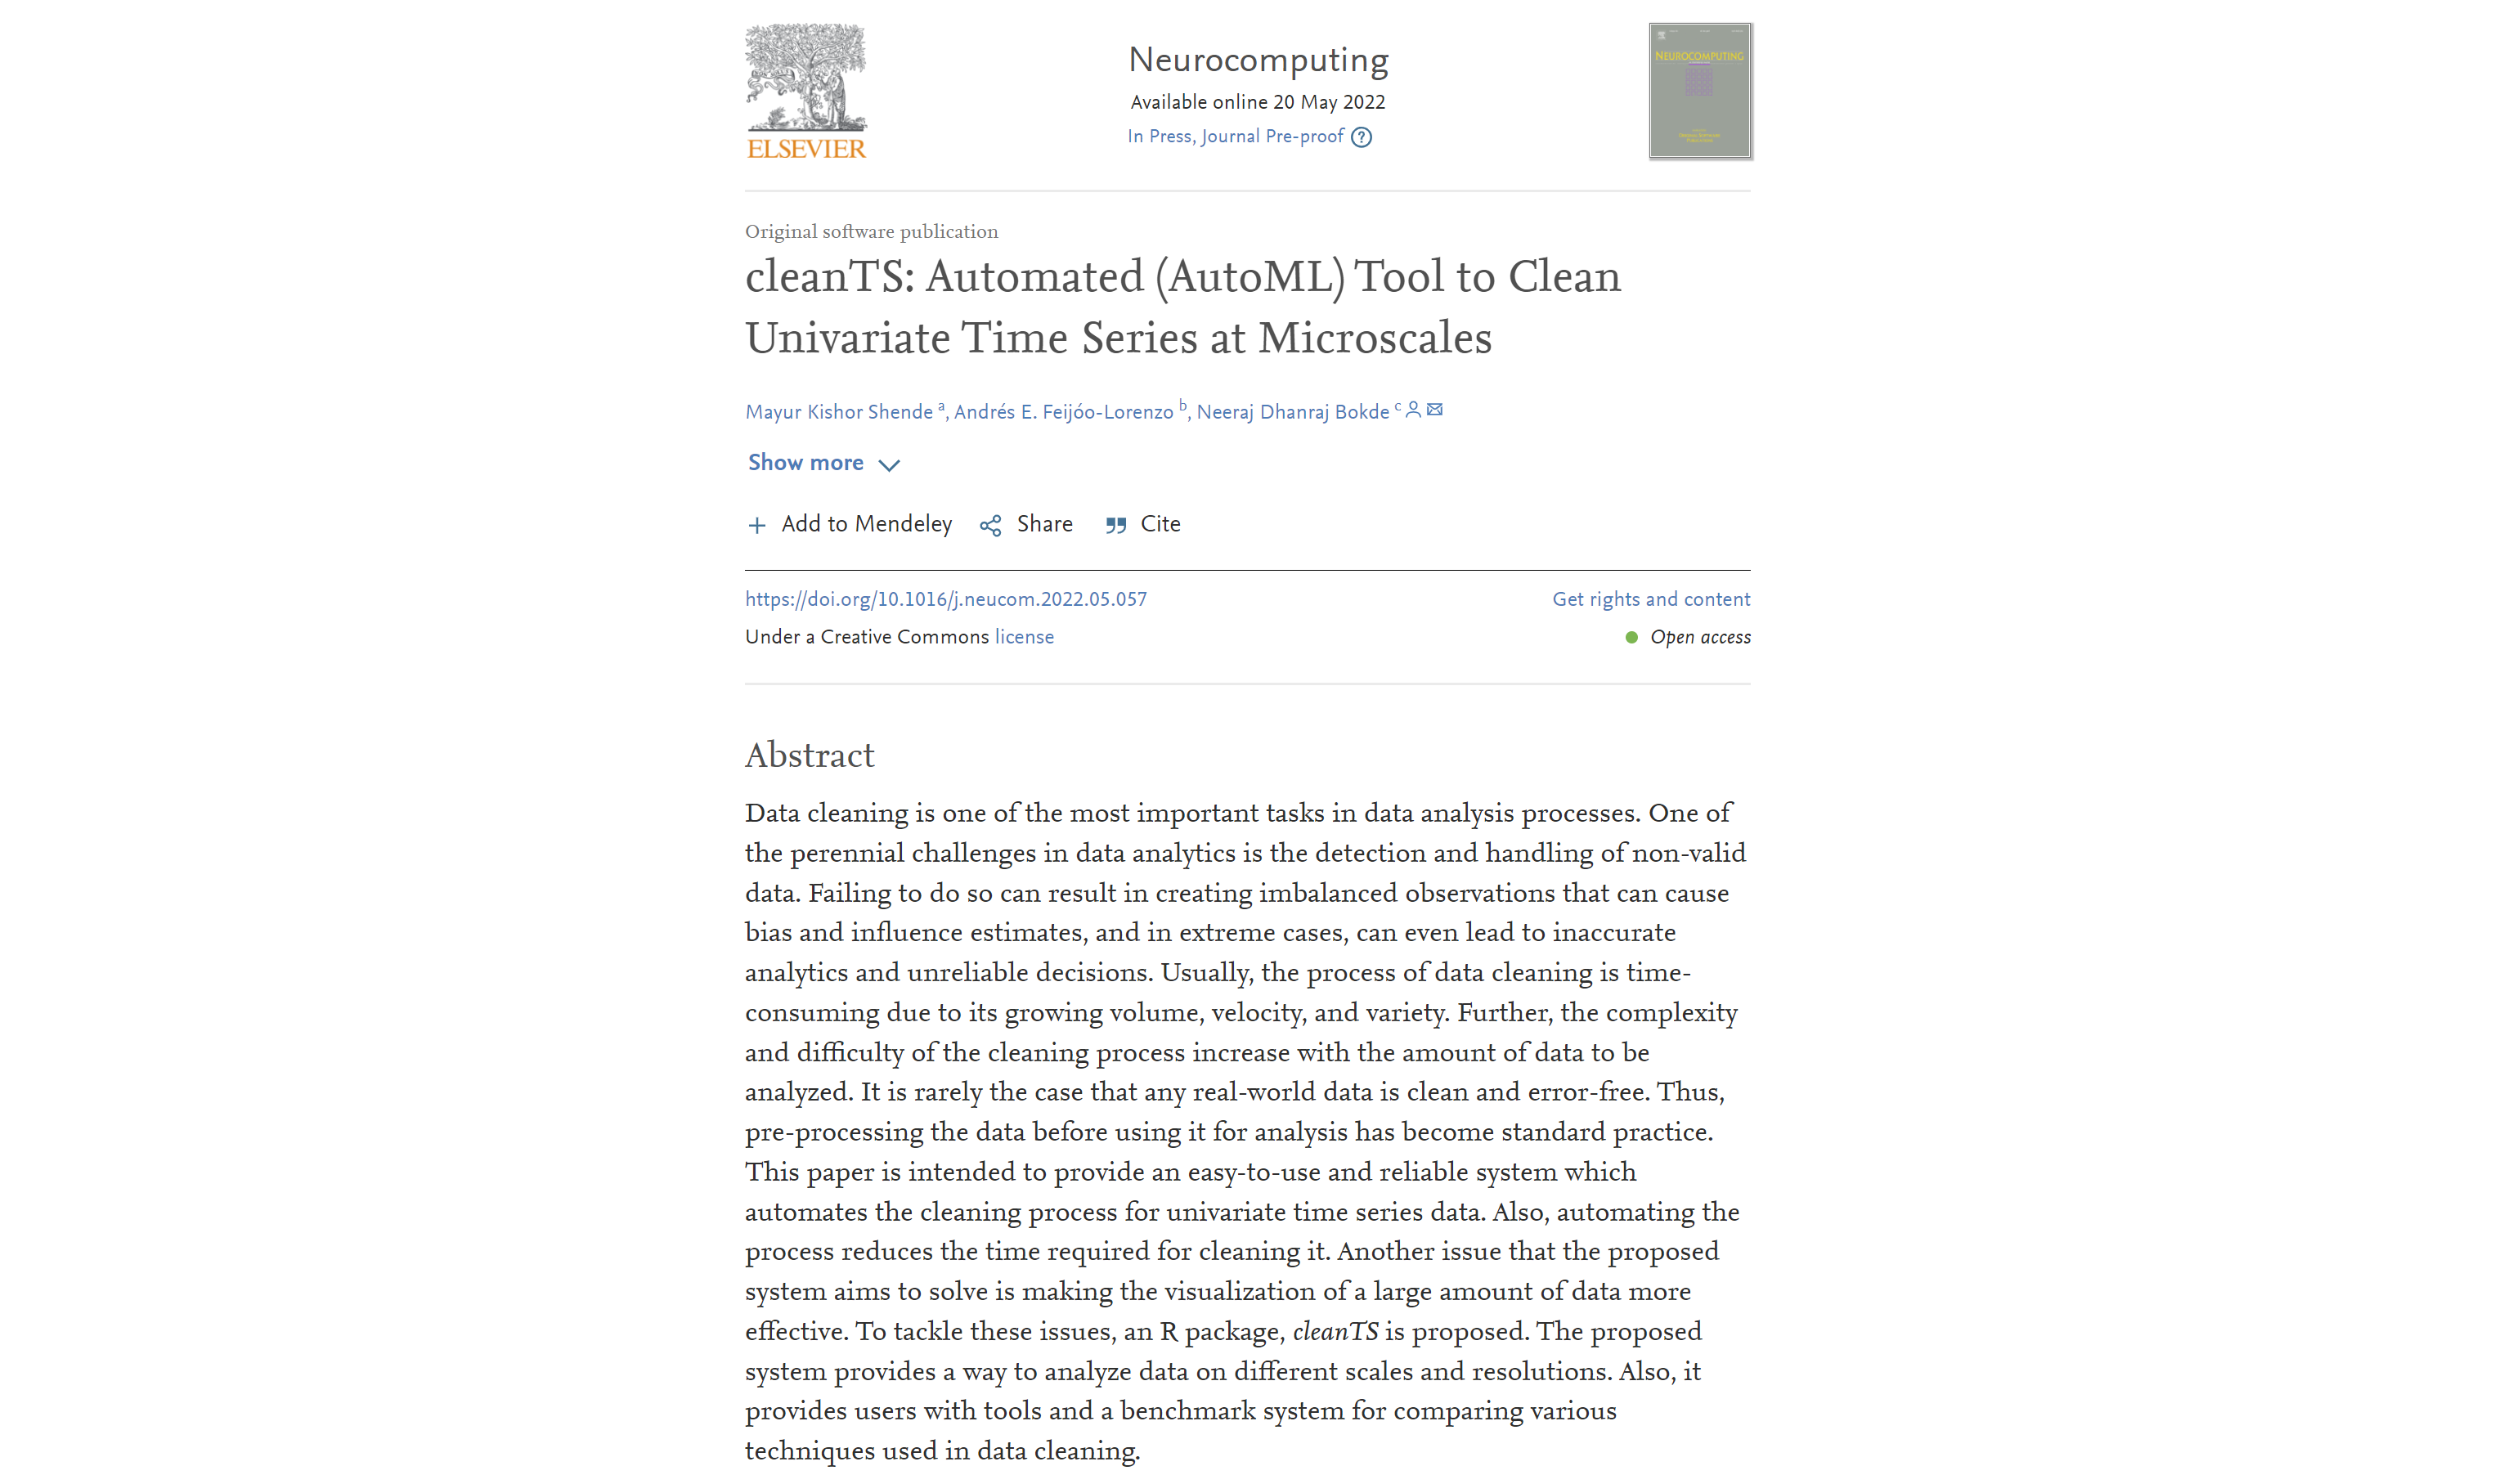 cleanTS - a tool funded by Google Summer of Code (GSoC) - 2021 is now published in Neurocomputing (Elsevier) journal